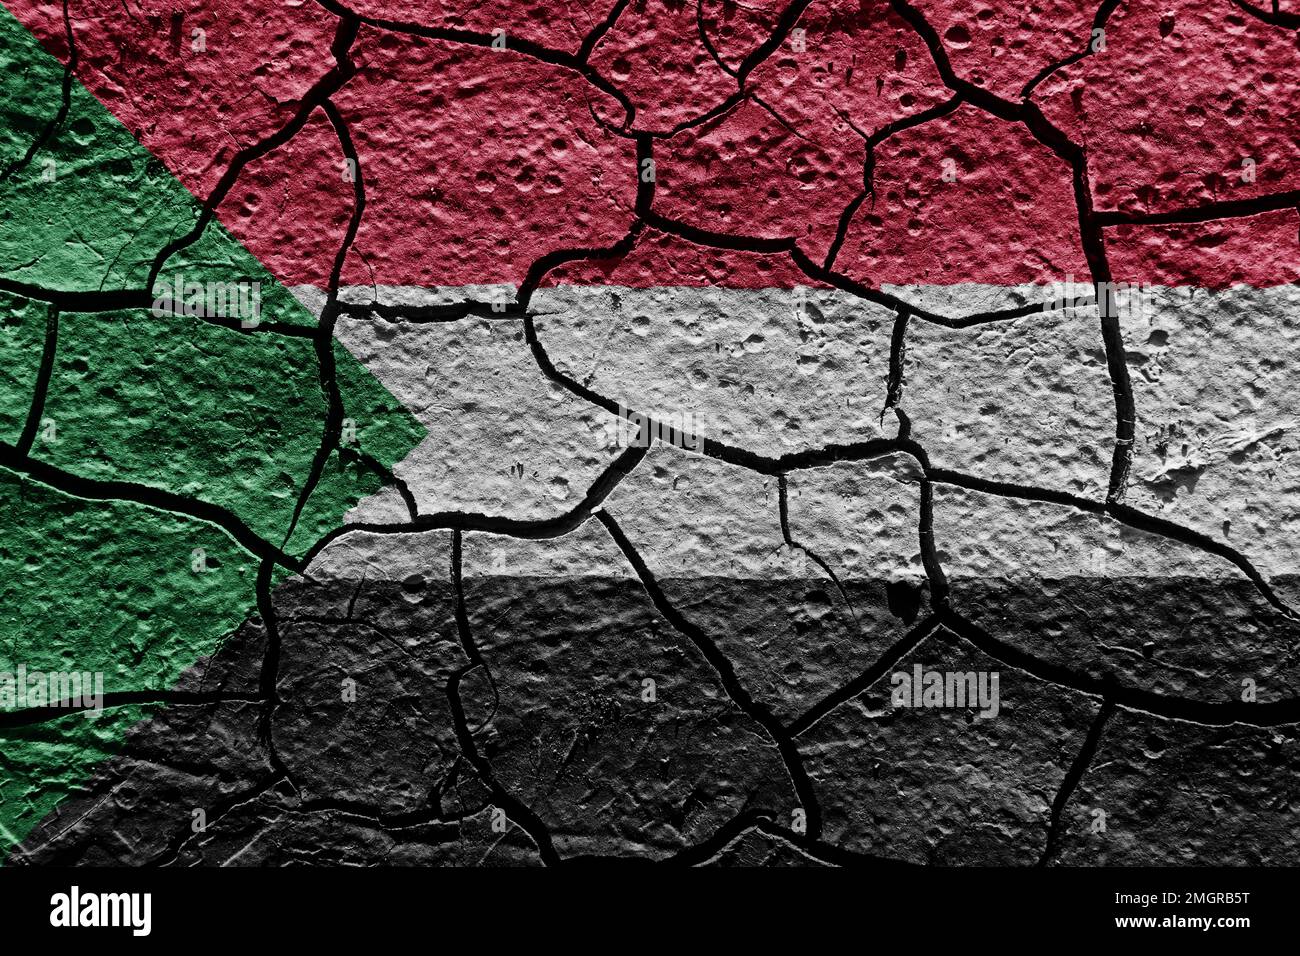 Sudan flag on a mud texture of dry crack on the ground Stock Photo